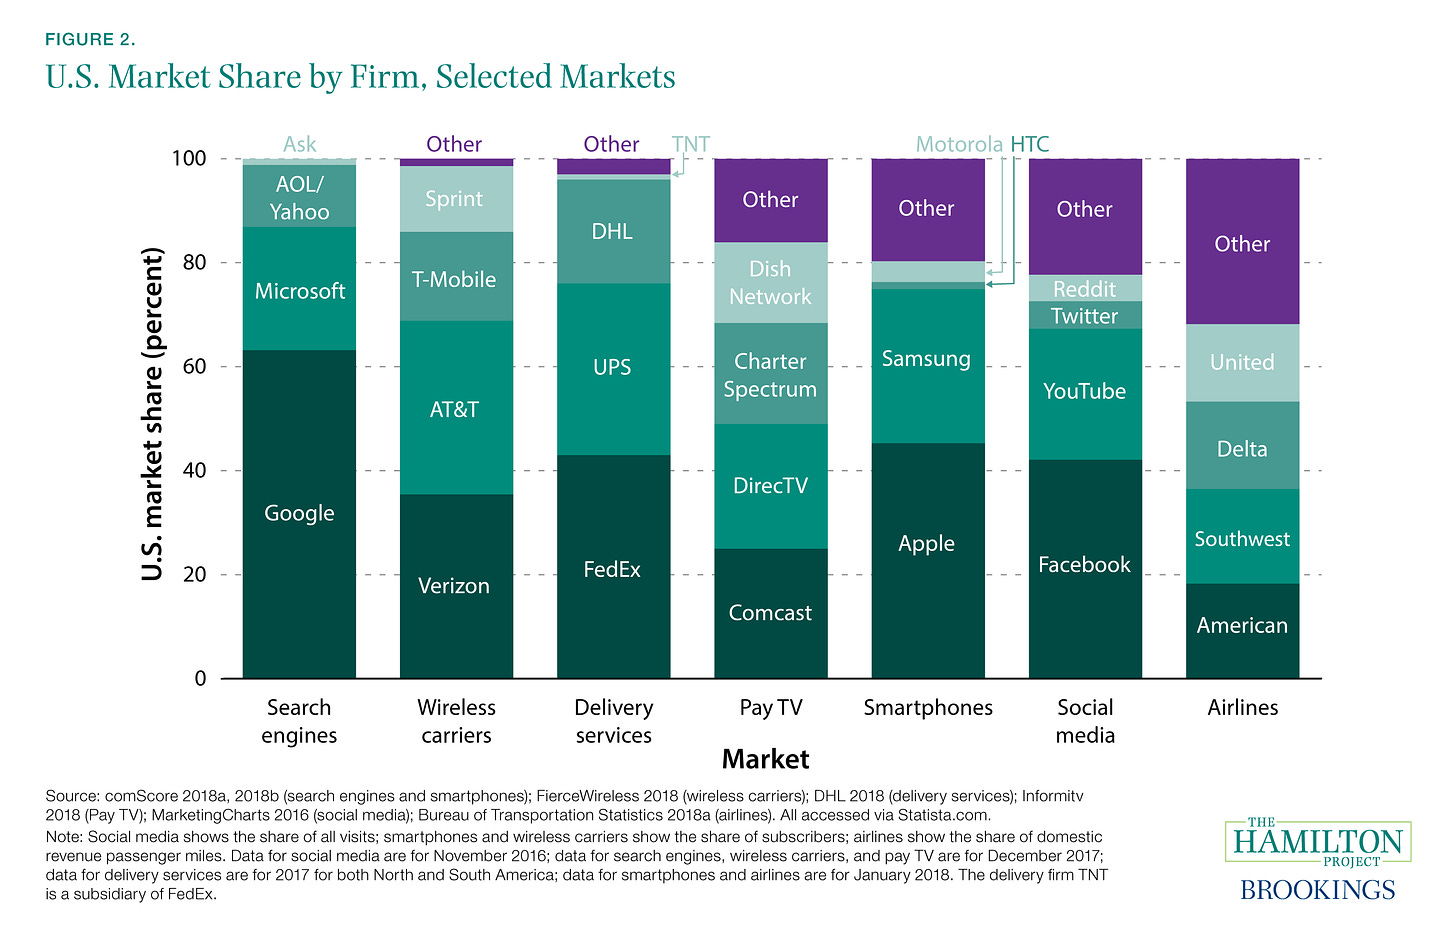 Figure 2. U.S. Market Share by Firm, Selected Markets